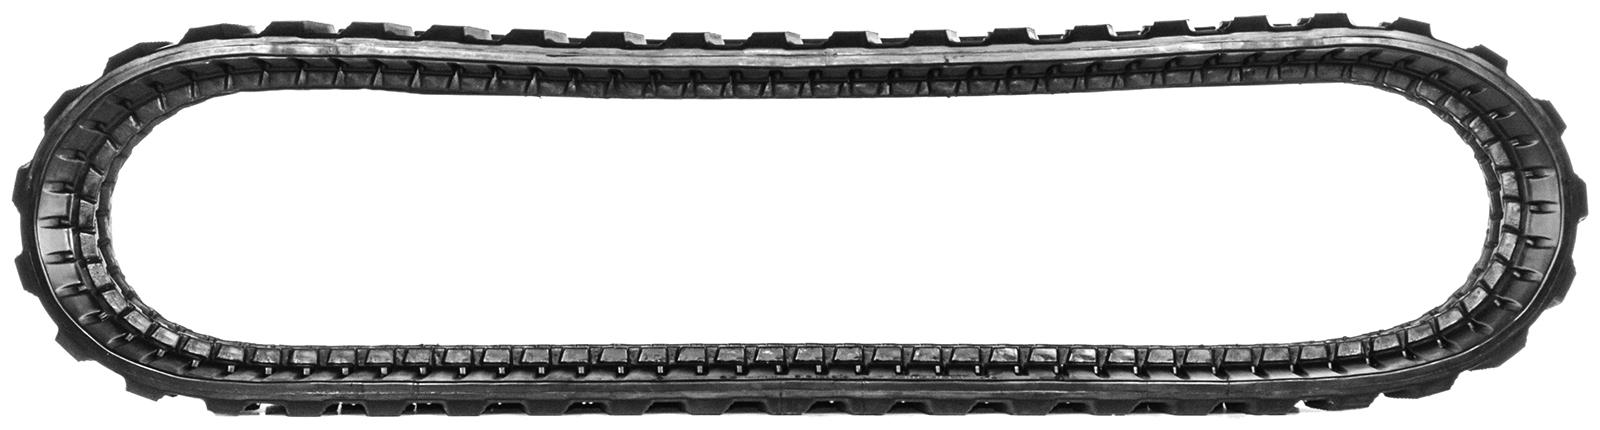 set of 2 14" camso heavy duty rubber track (350x54.5x86)